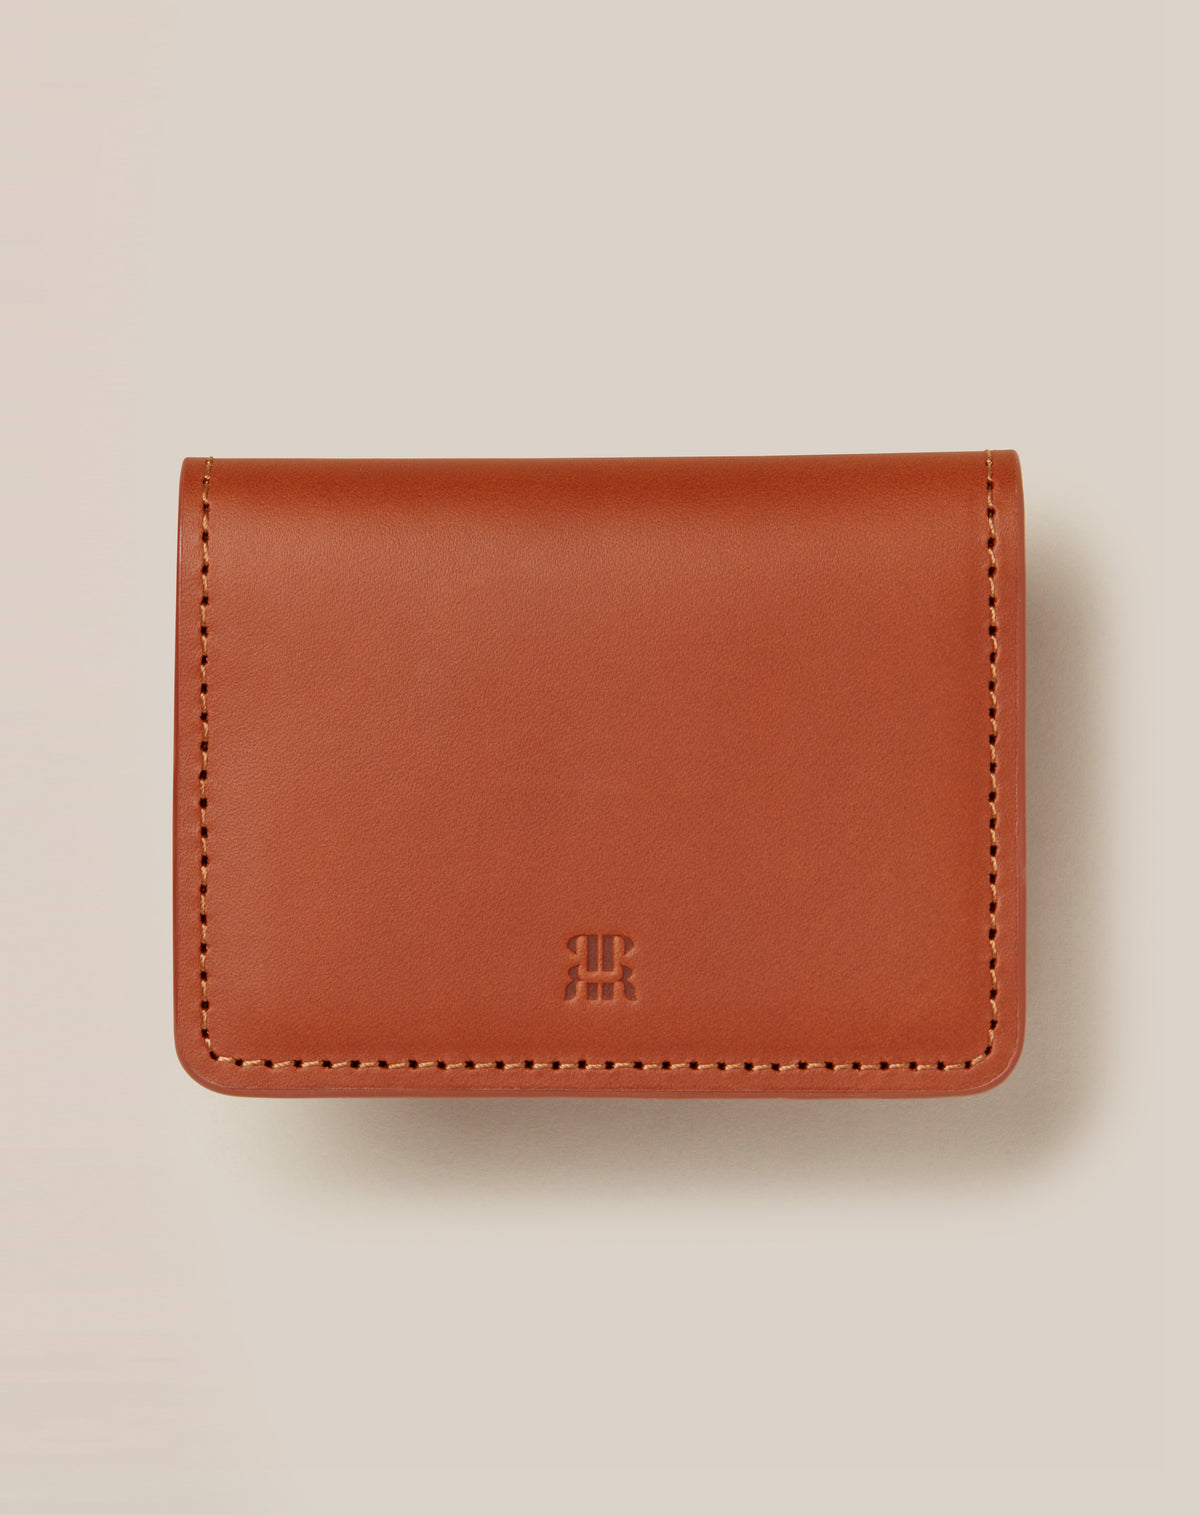 Harber London | Handcrafted leather goods: Wallets, Sleeves & Bags |  Handcrafted leather, Handcraft, Handcrafted luxury